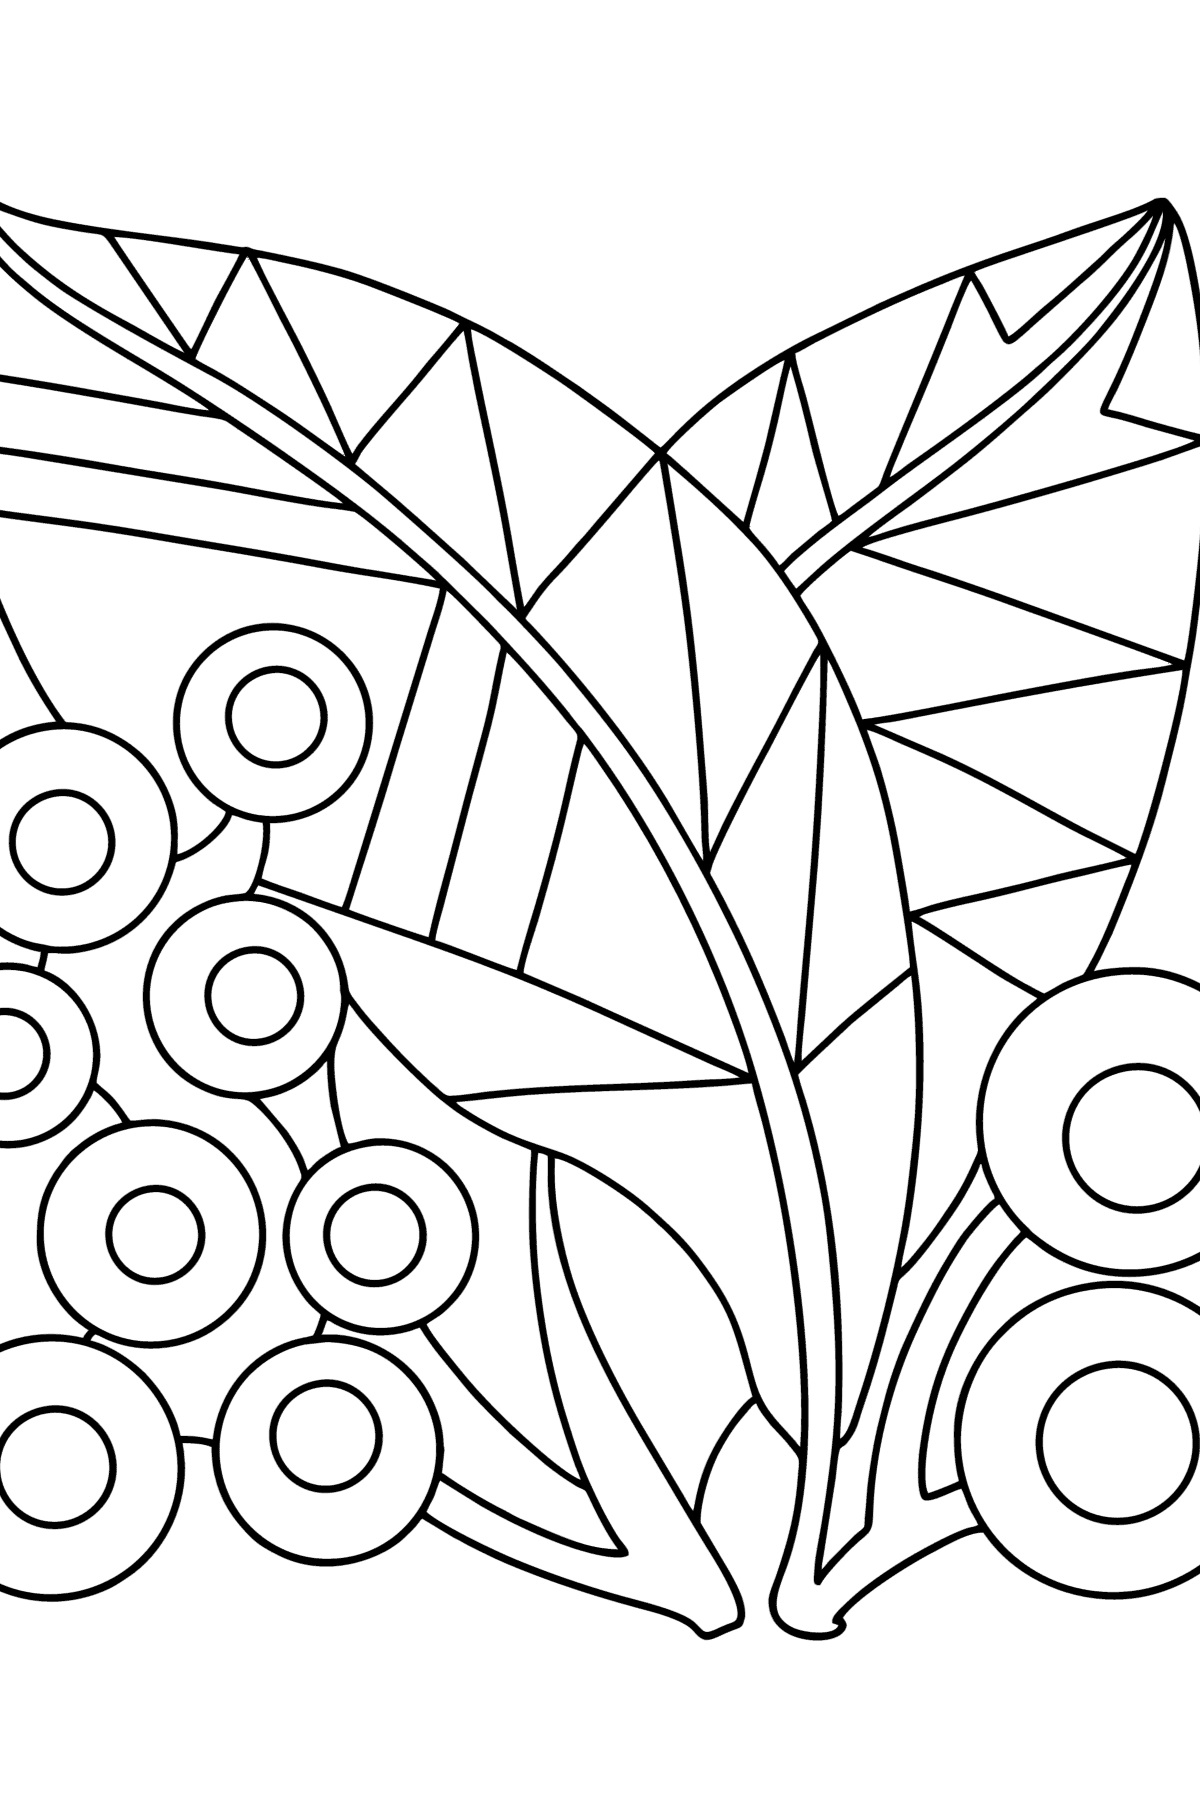 Anti stress Grapes coloring page - Coloring Pages for Kids